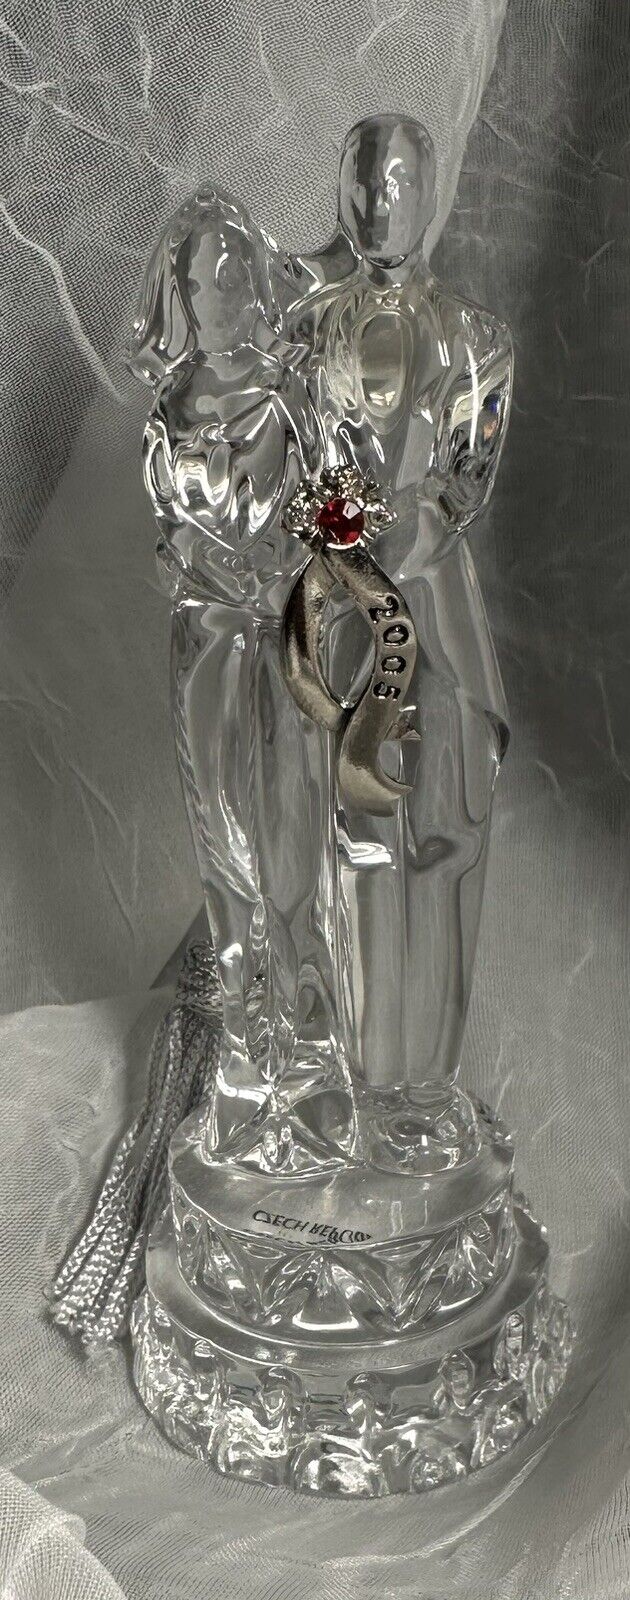 PERFECT for 2025 AnniversaryLENOX Crystal 2005 Bride & Groom Ornament Red Stone